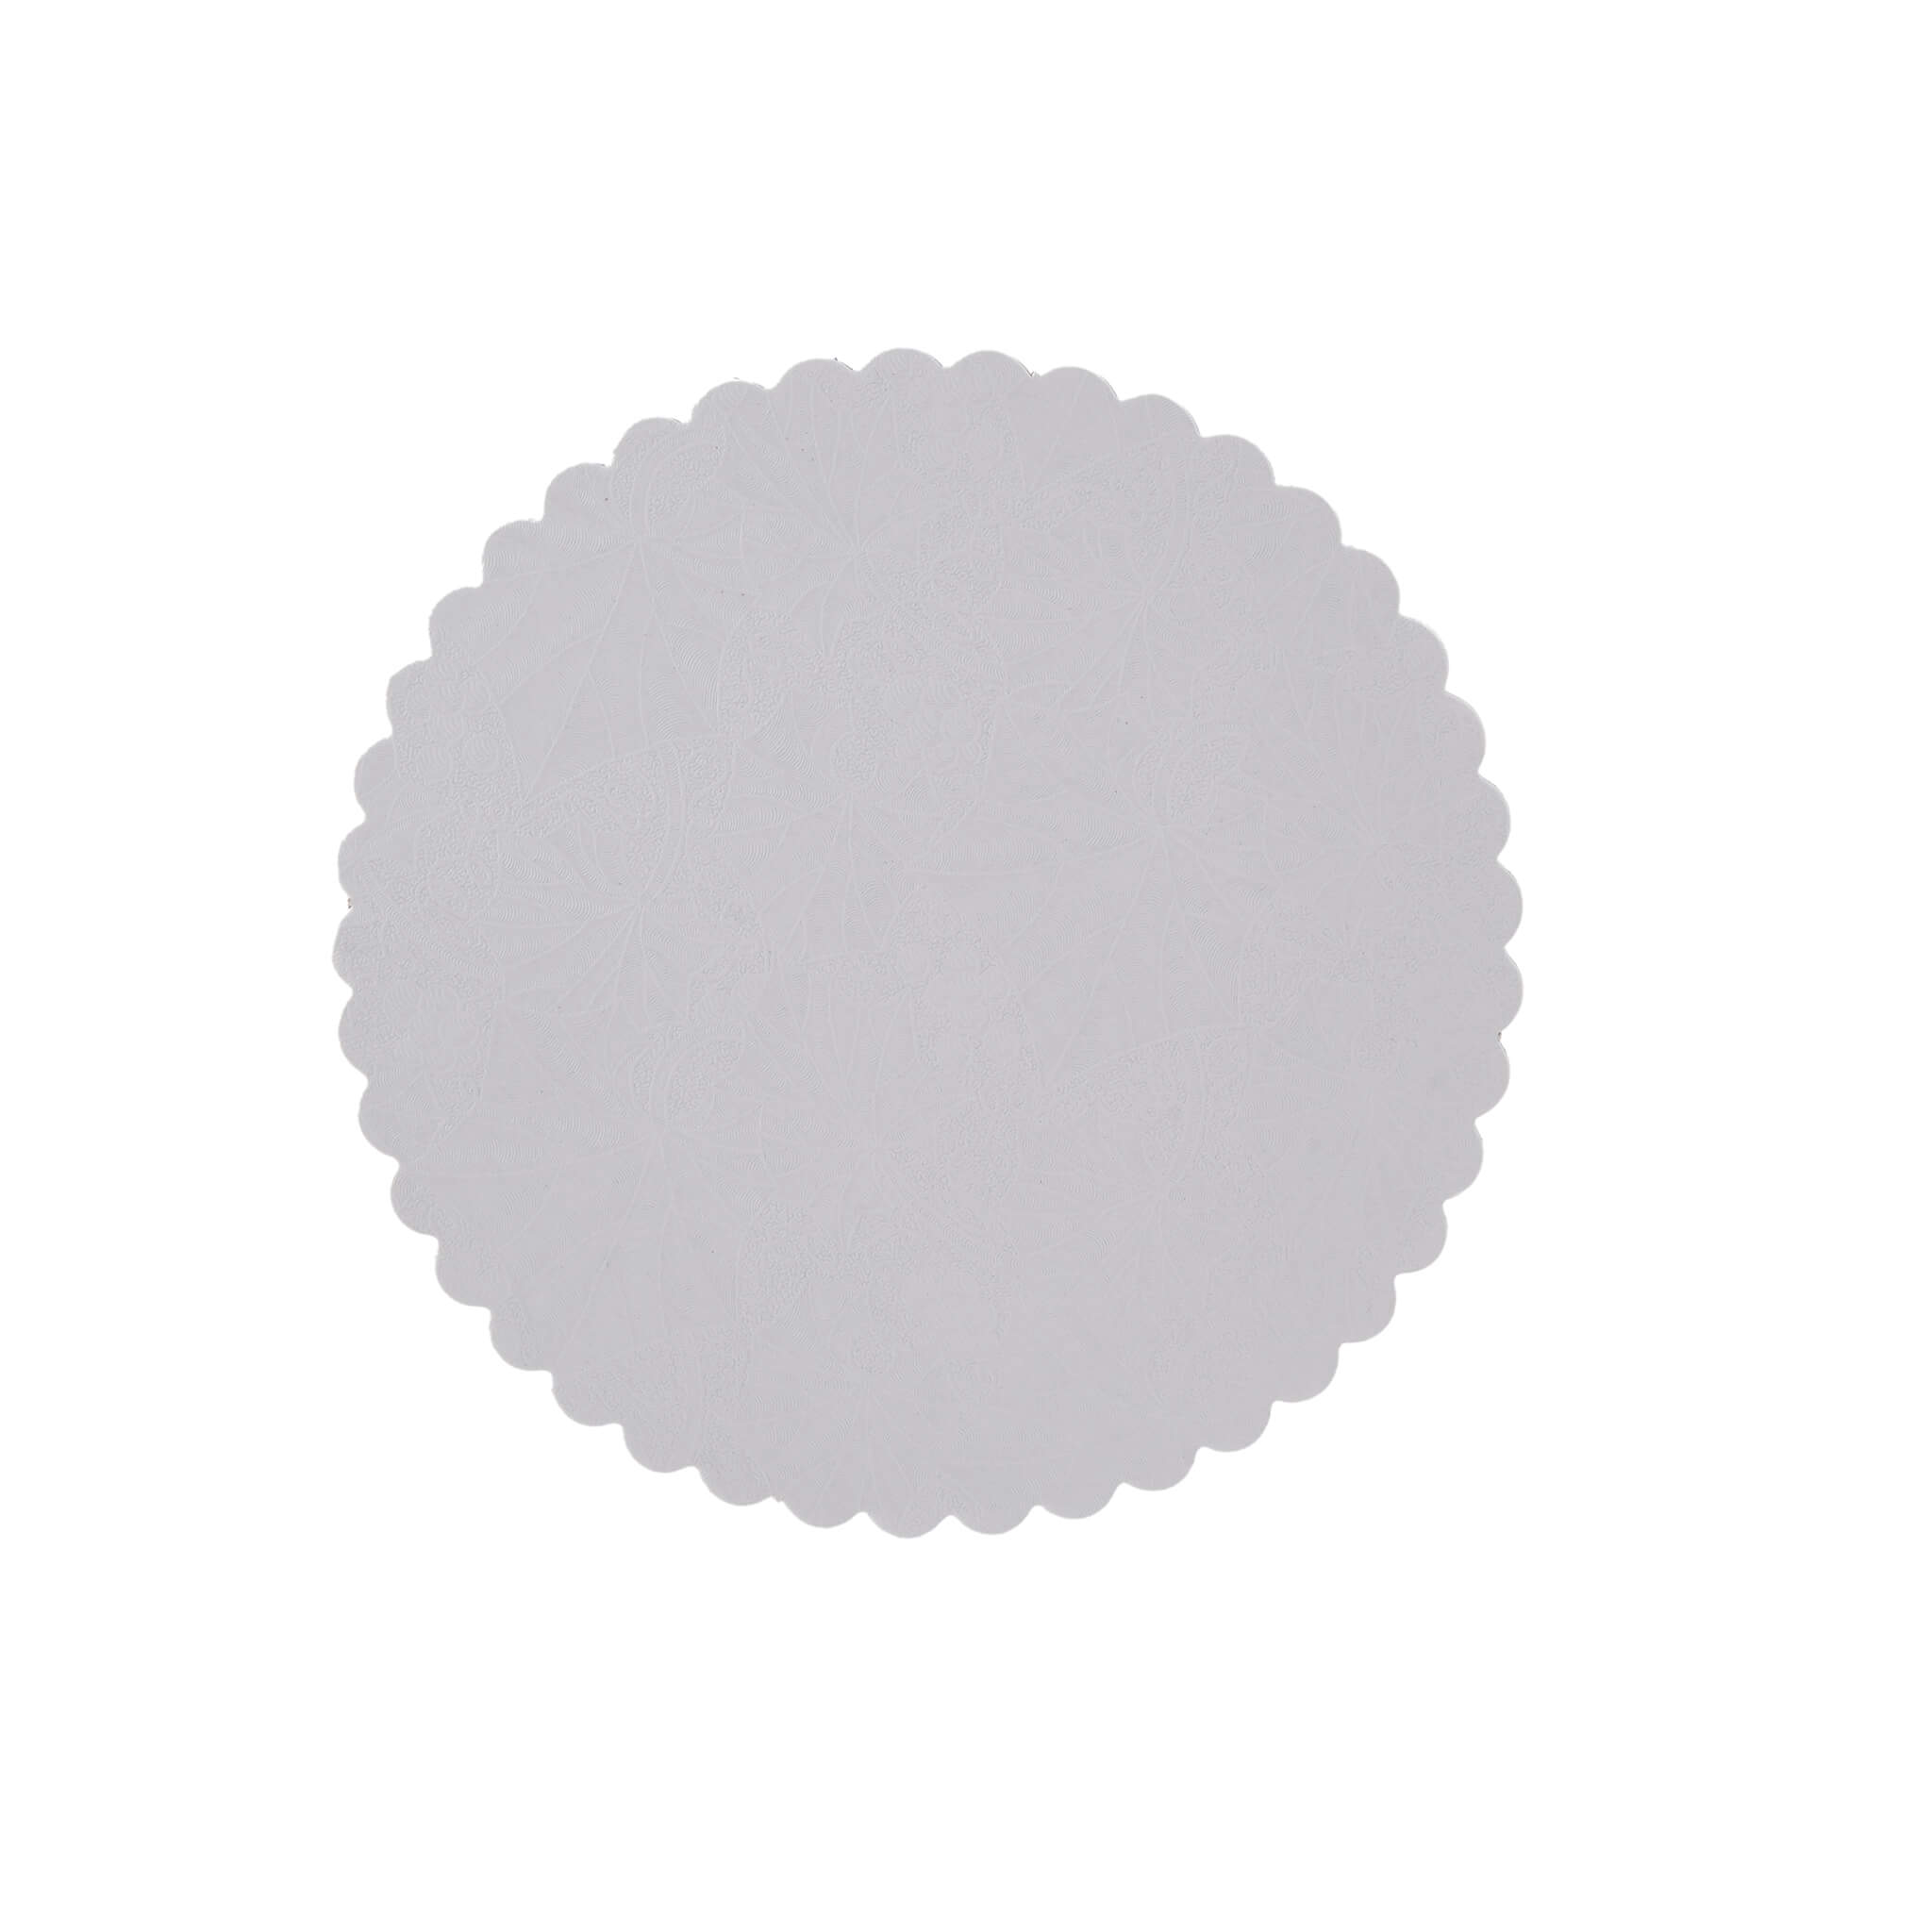 White Round Cake Board 5 Pieces - Hotpack Global